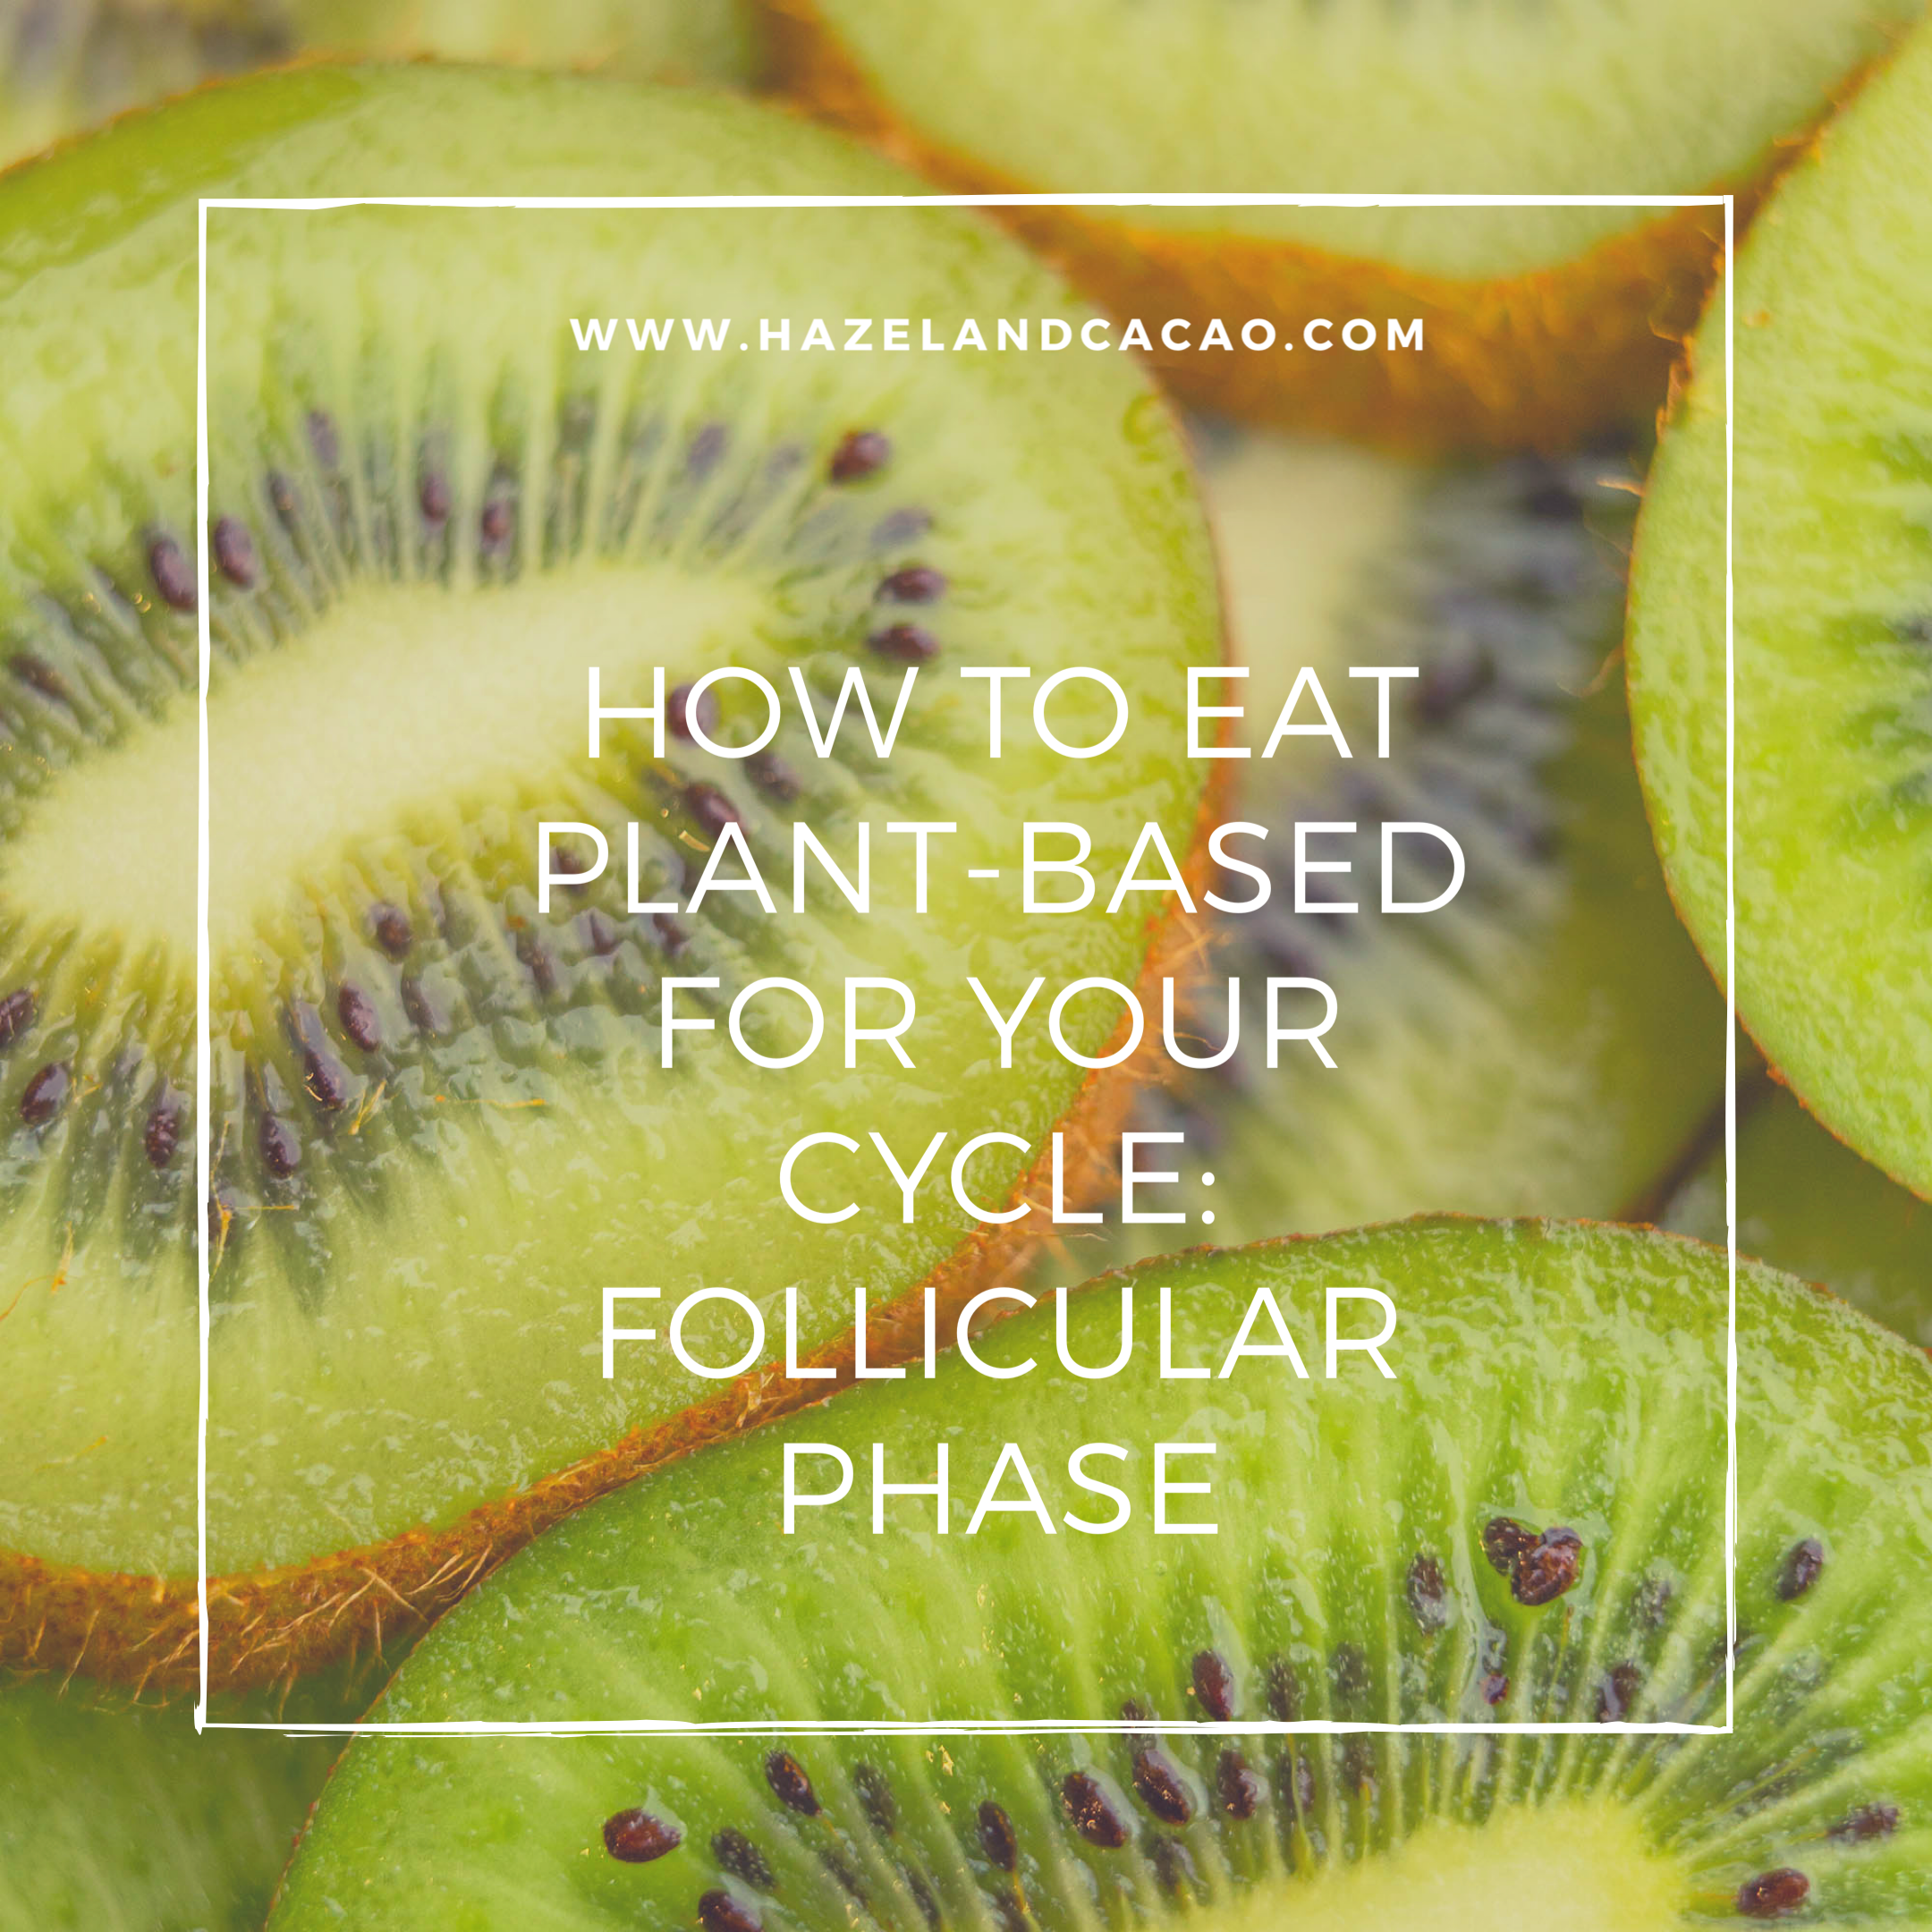 How to Eat Plant-Based for your Cycle: Follicular Phase